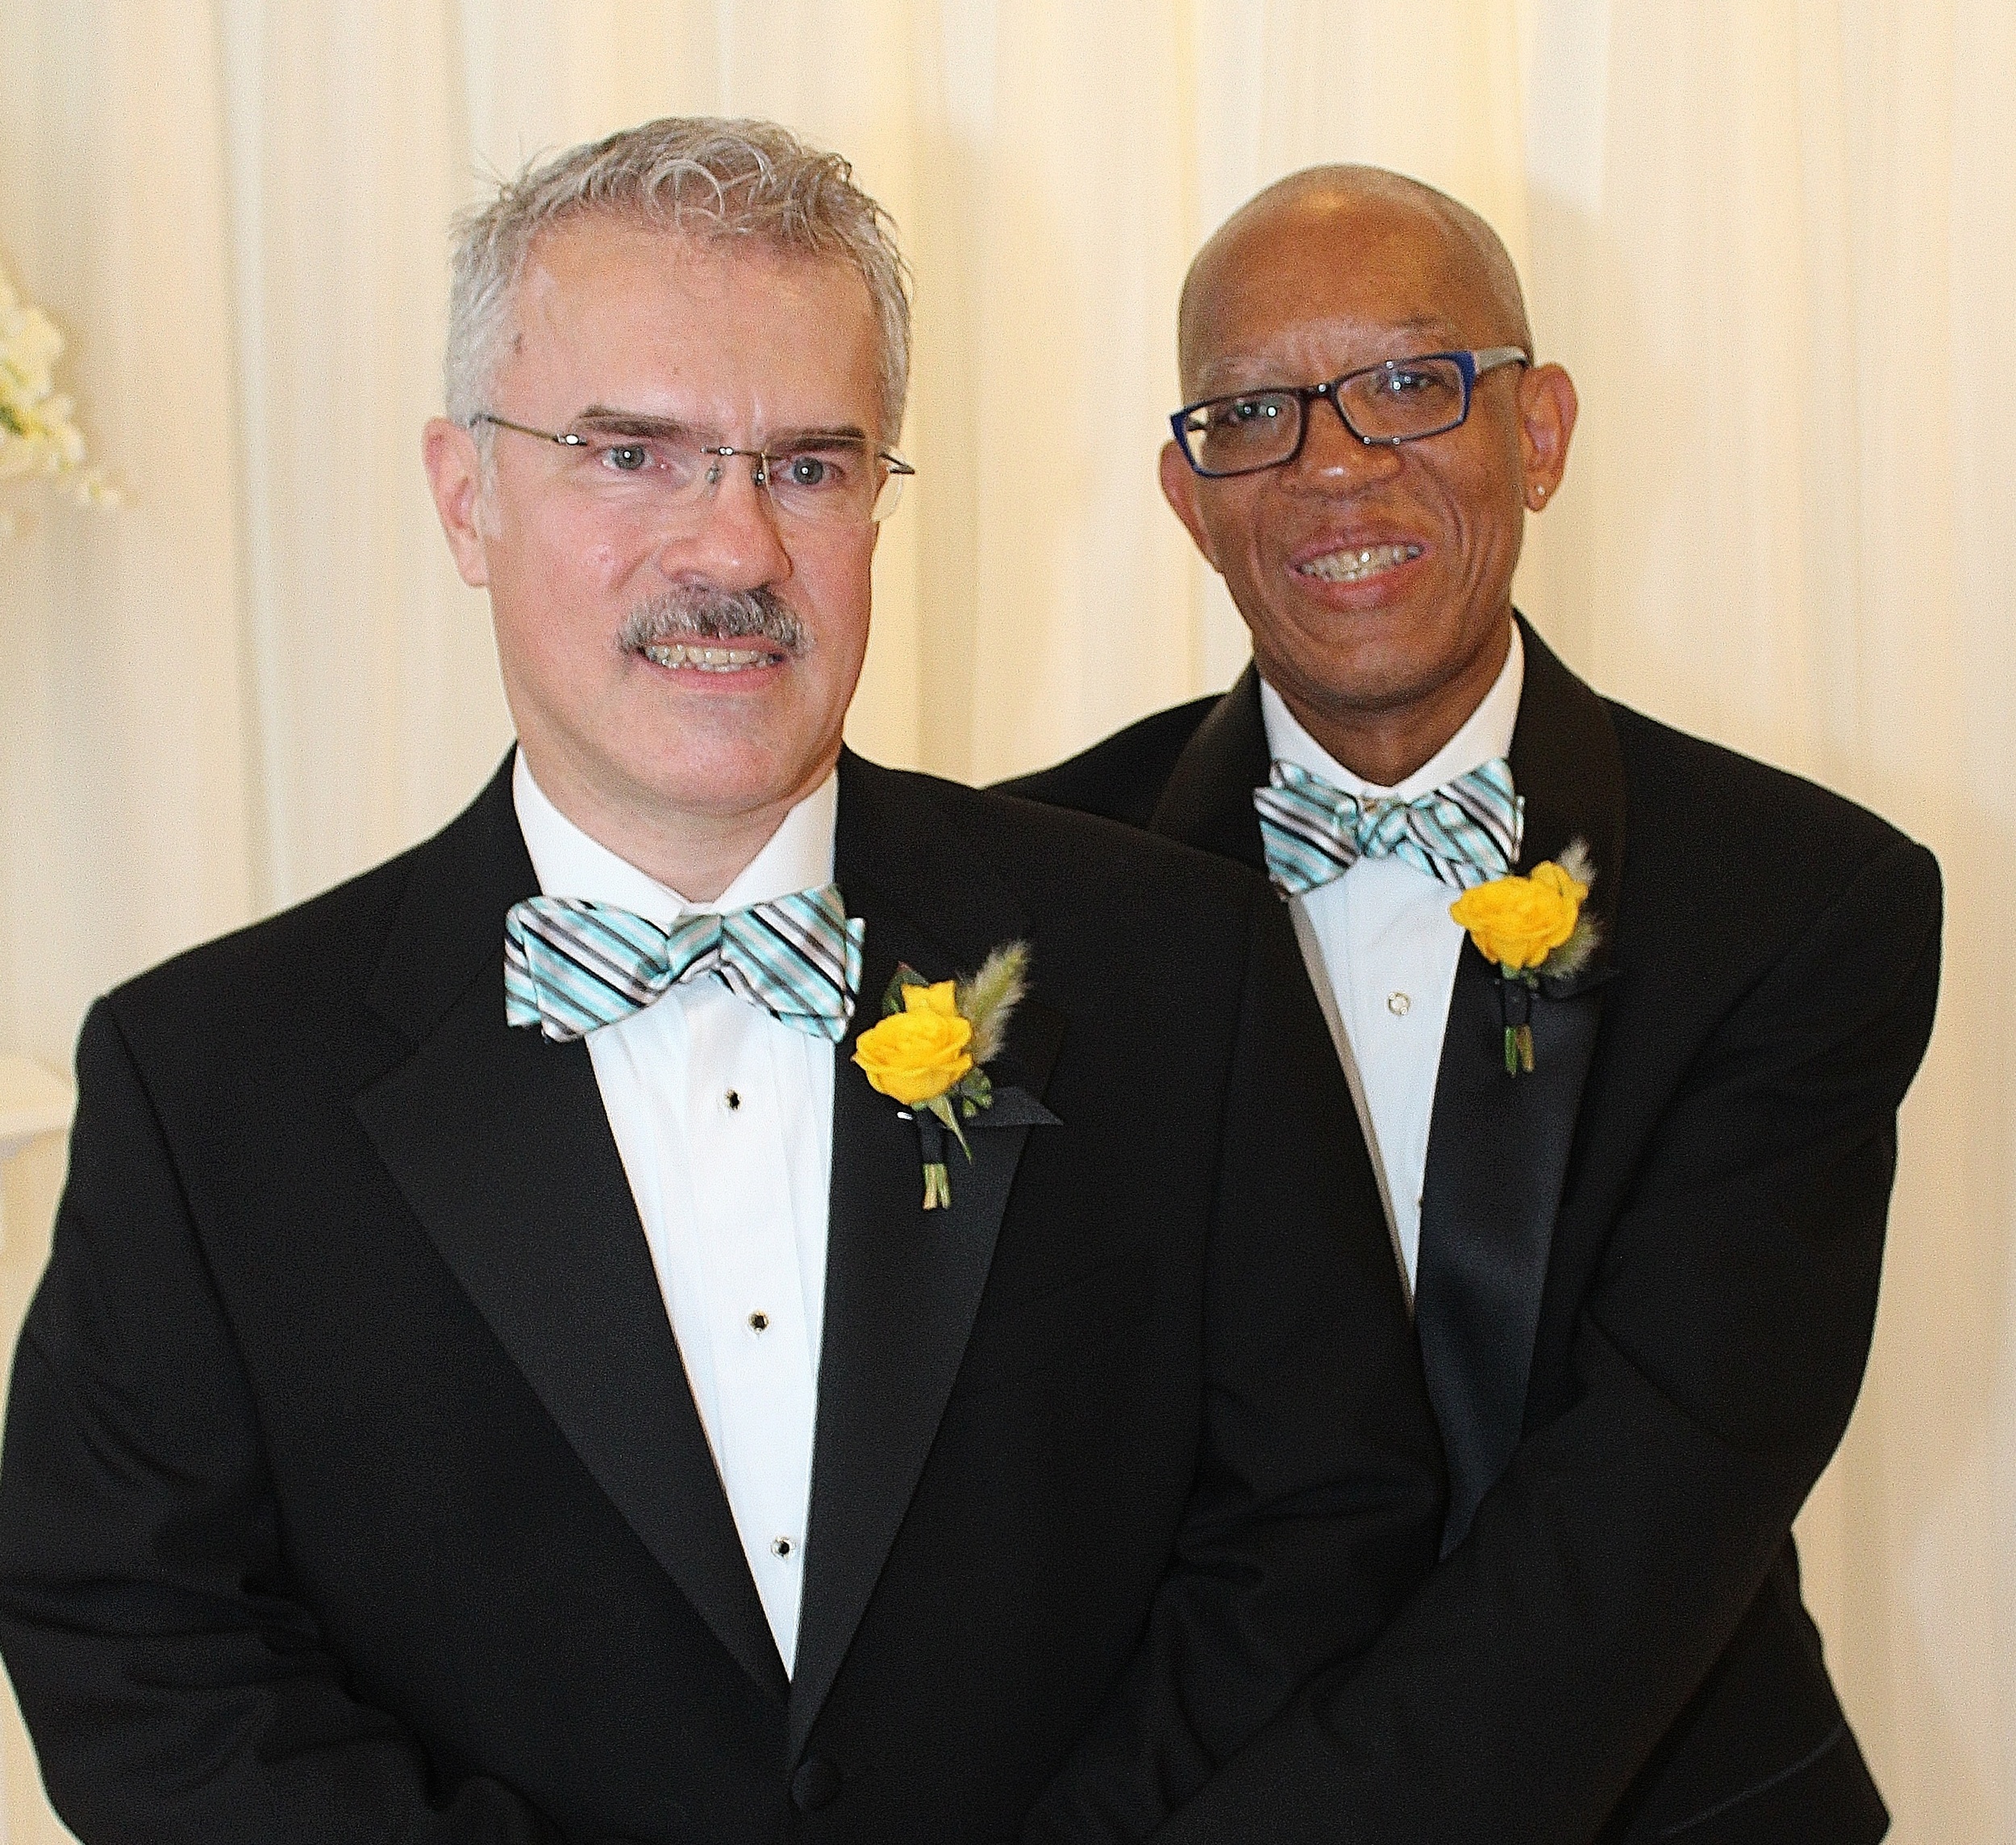 wedding #   2  Stanley and Larence  sat  june 28th 2014 094.jpg